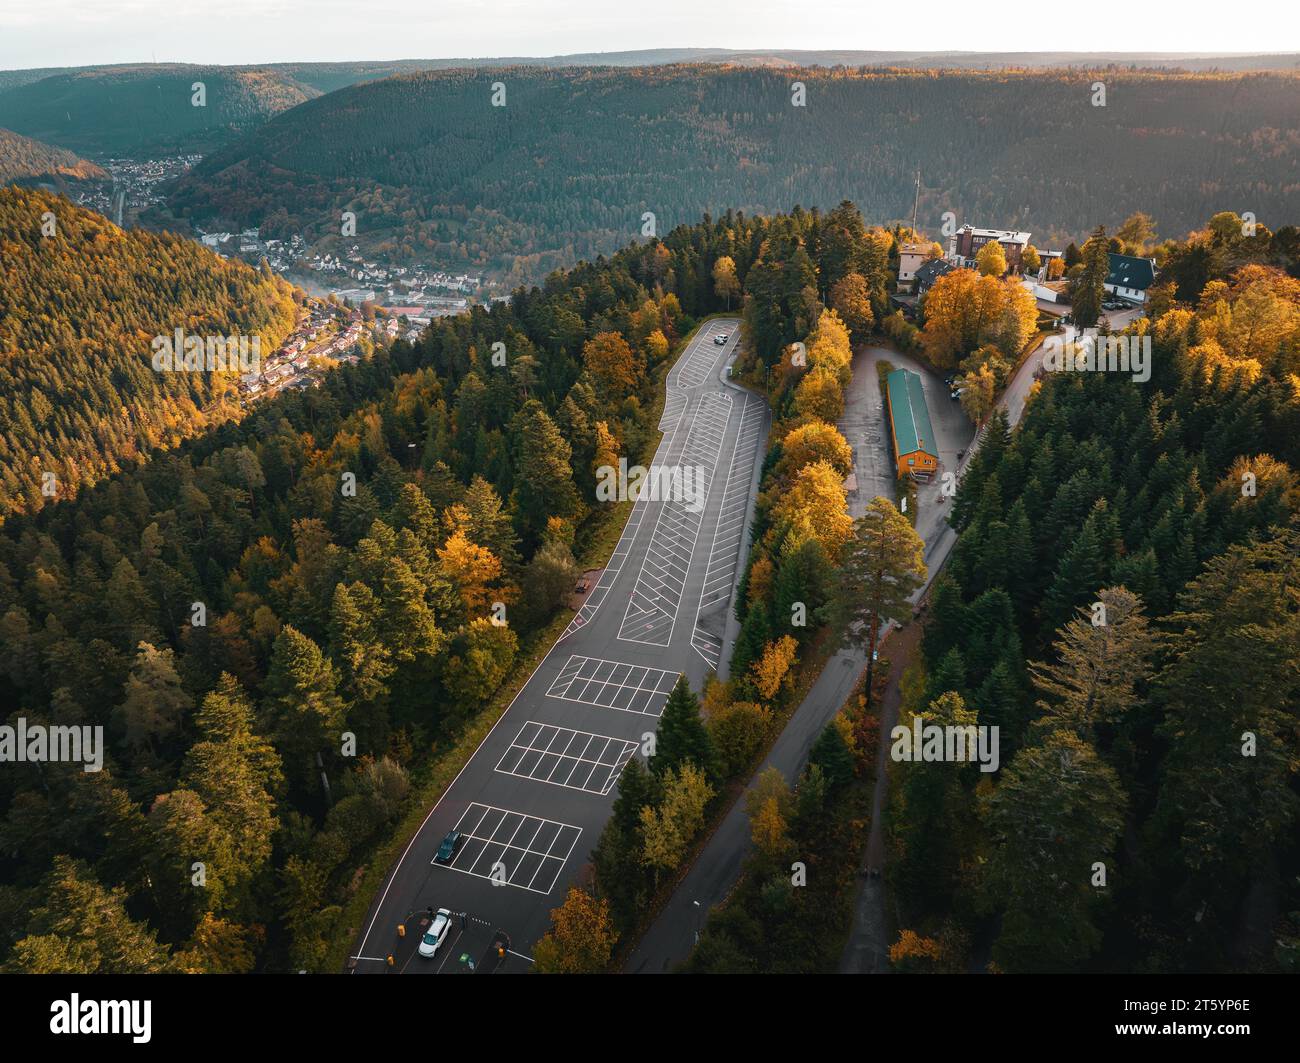 Car park in autumn forest, Sommerberg, Black Forest, Bad Wildbad, Germany Stock Photo